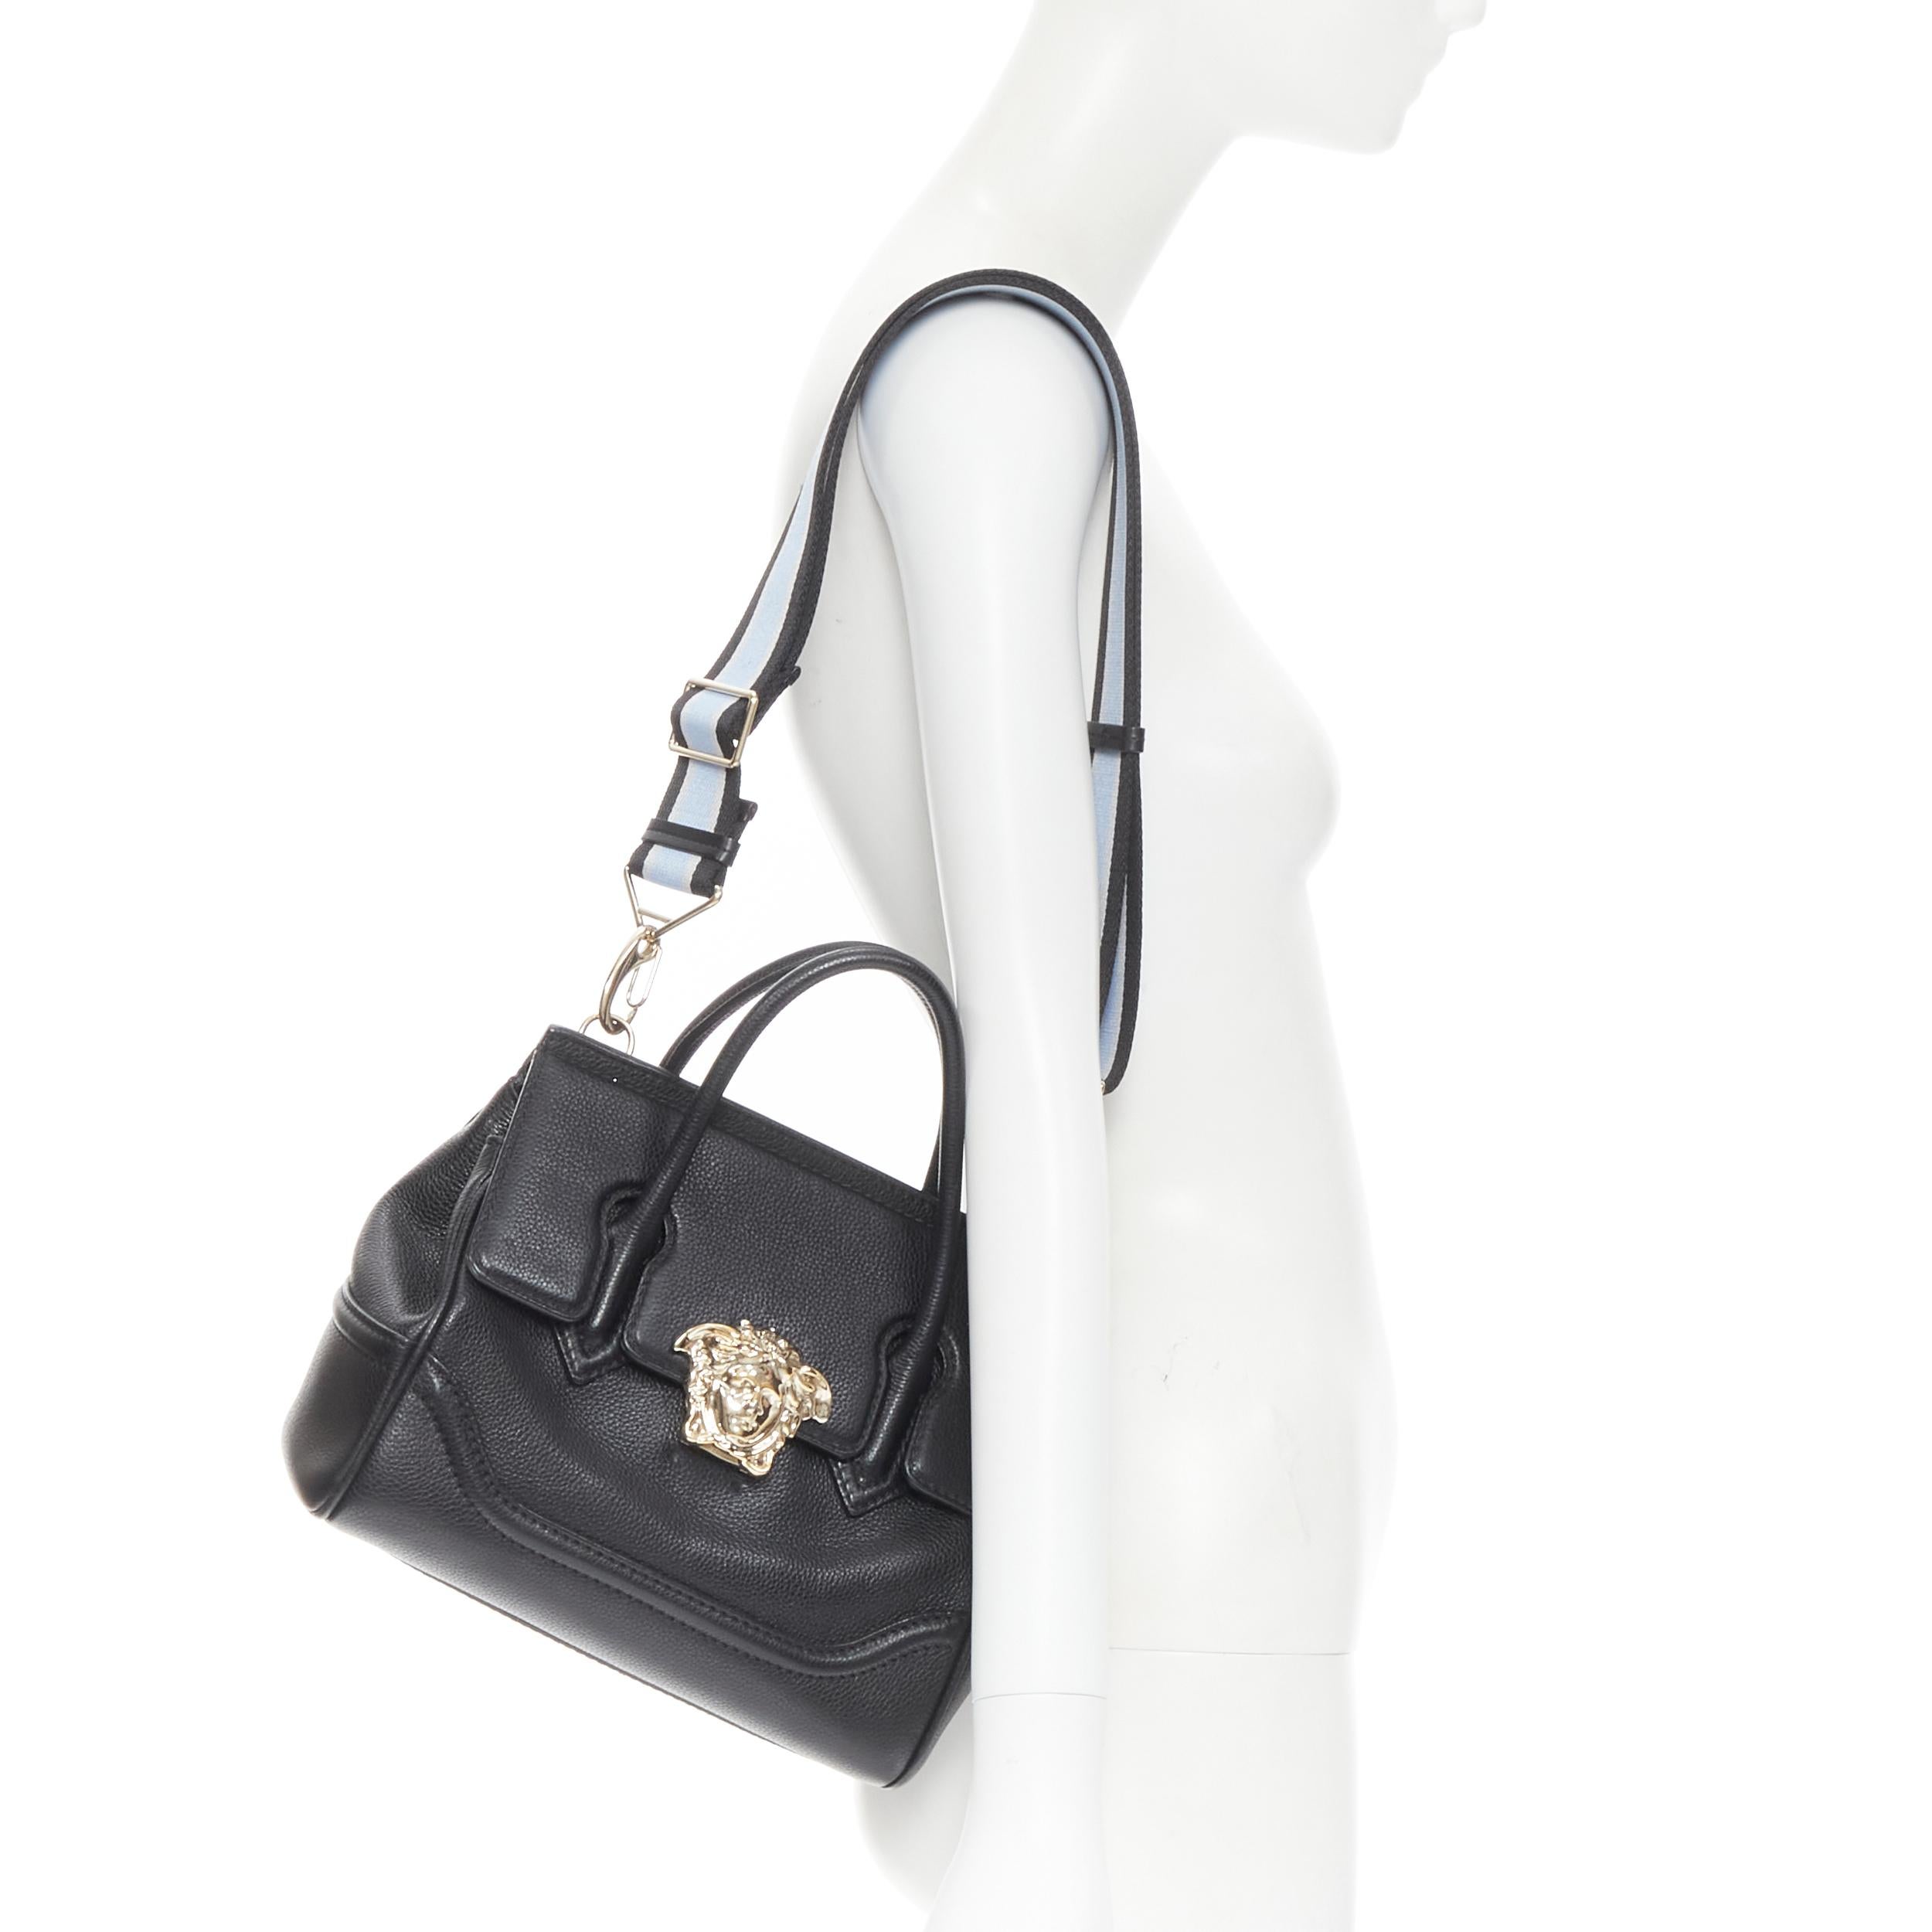 VERSACE Palazzo Empire Small black gold Medusa crossbody satchel bag 
Reference: TGAS/B01402 
Brand: Versace 
Designer: Donatella Versace 
Model: Empire 
Small Material: Leather 
Color: Black 
Pattern: Solid 
Closure: Clasp 
Extra Detail: Palazzo